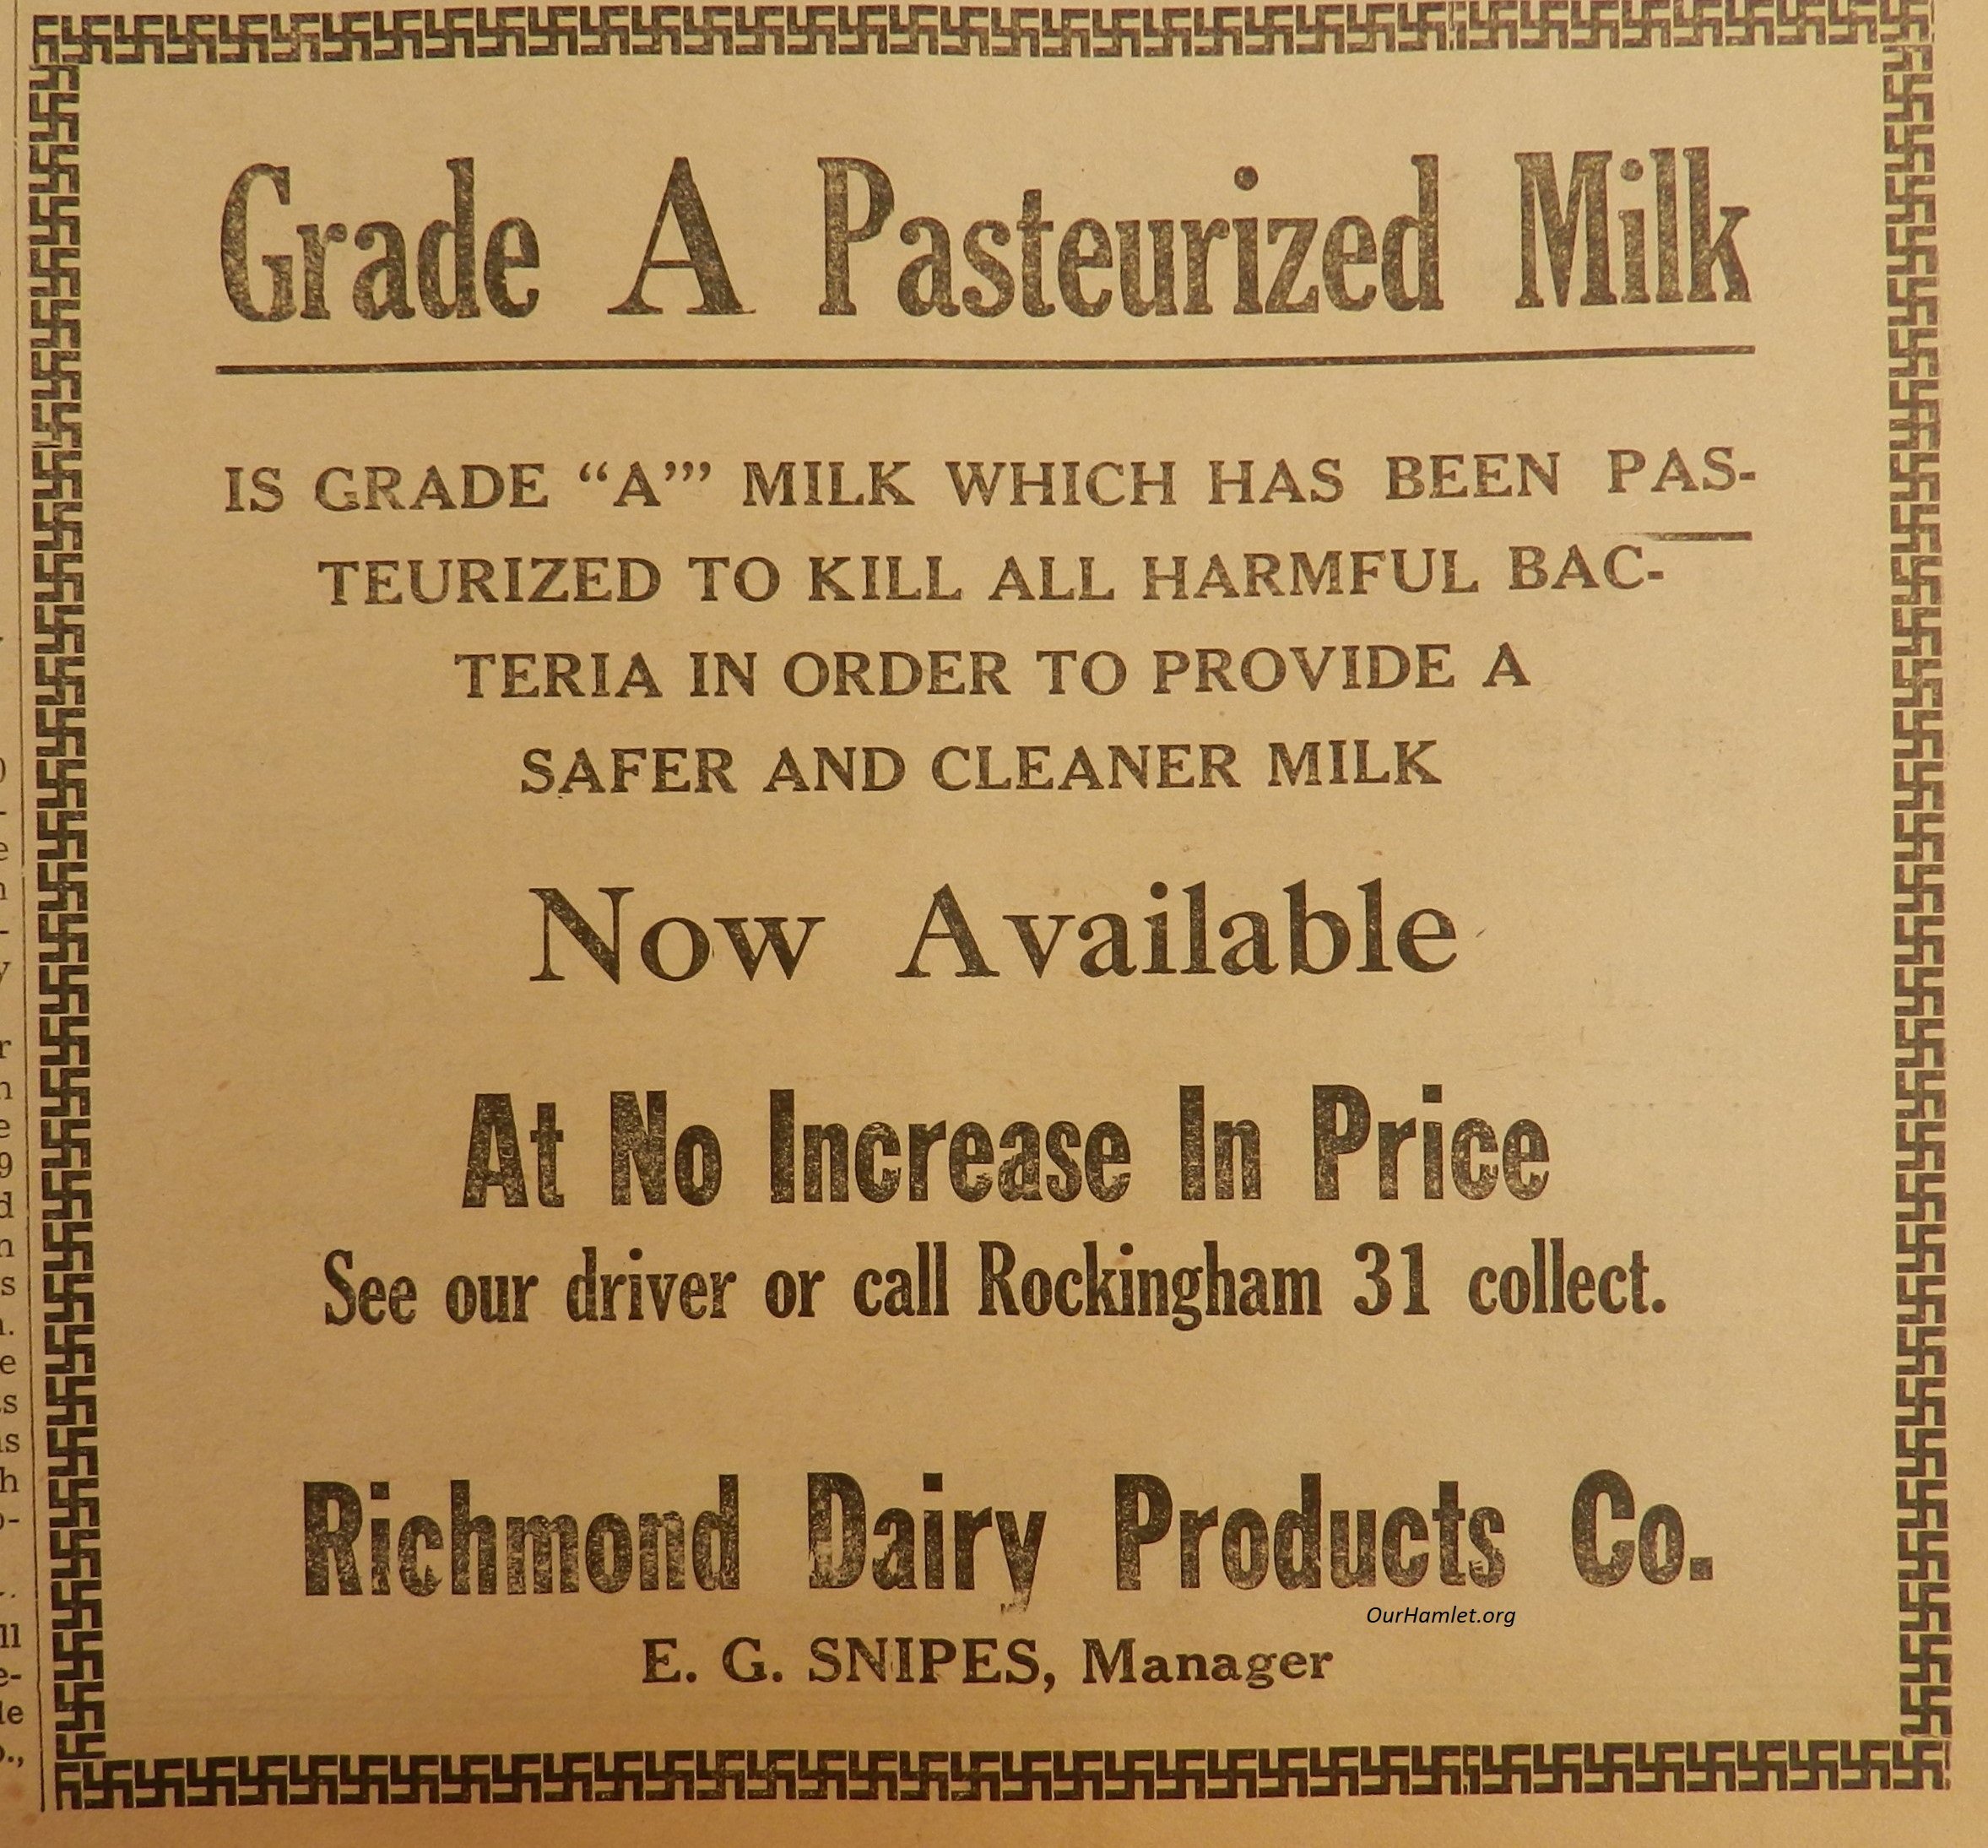 1935 Richmond Dairy Products OH.jpg